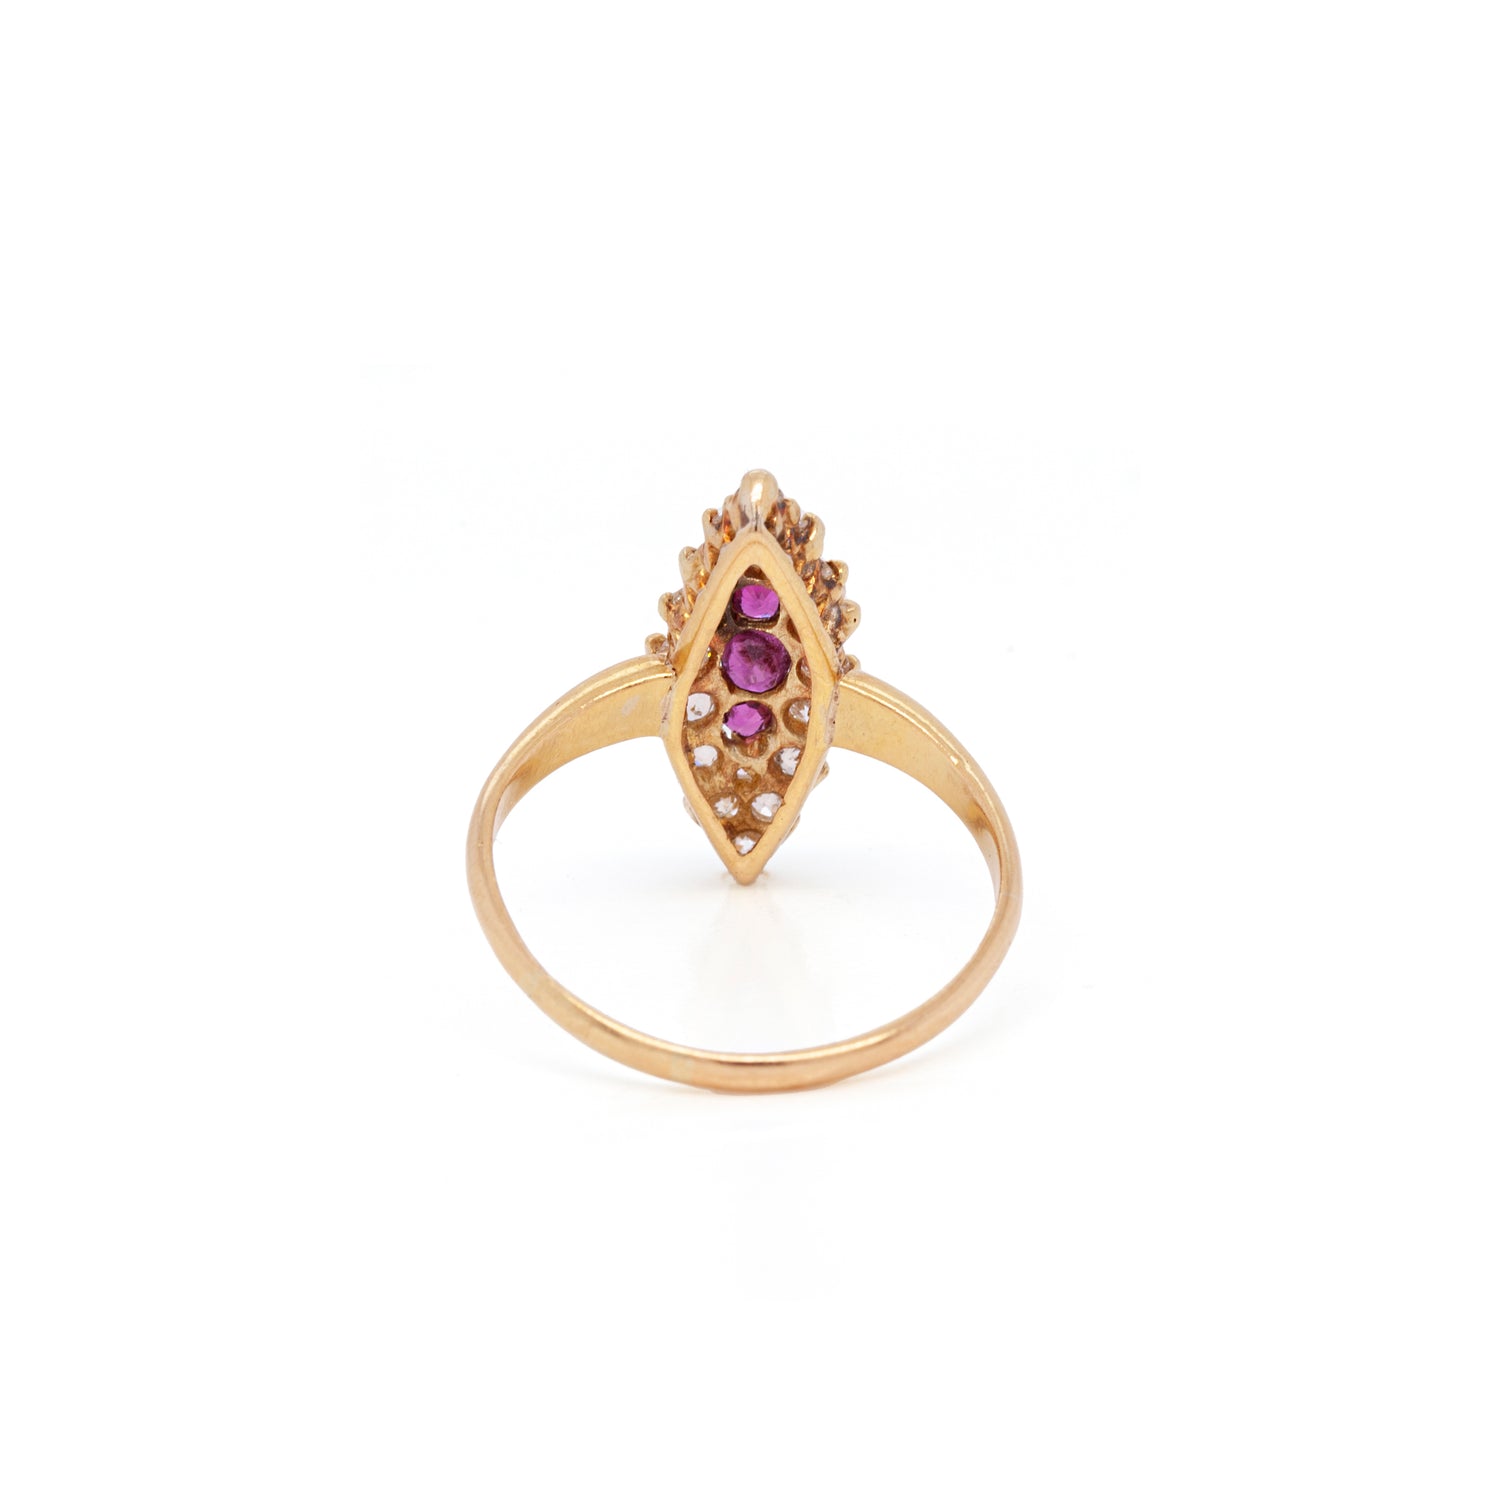 Ruby and Old Cut Diamond 18 Carat Yellow Gold Marquise Shape Cluster Ring